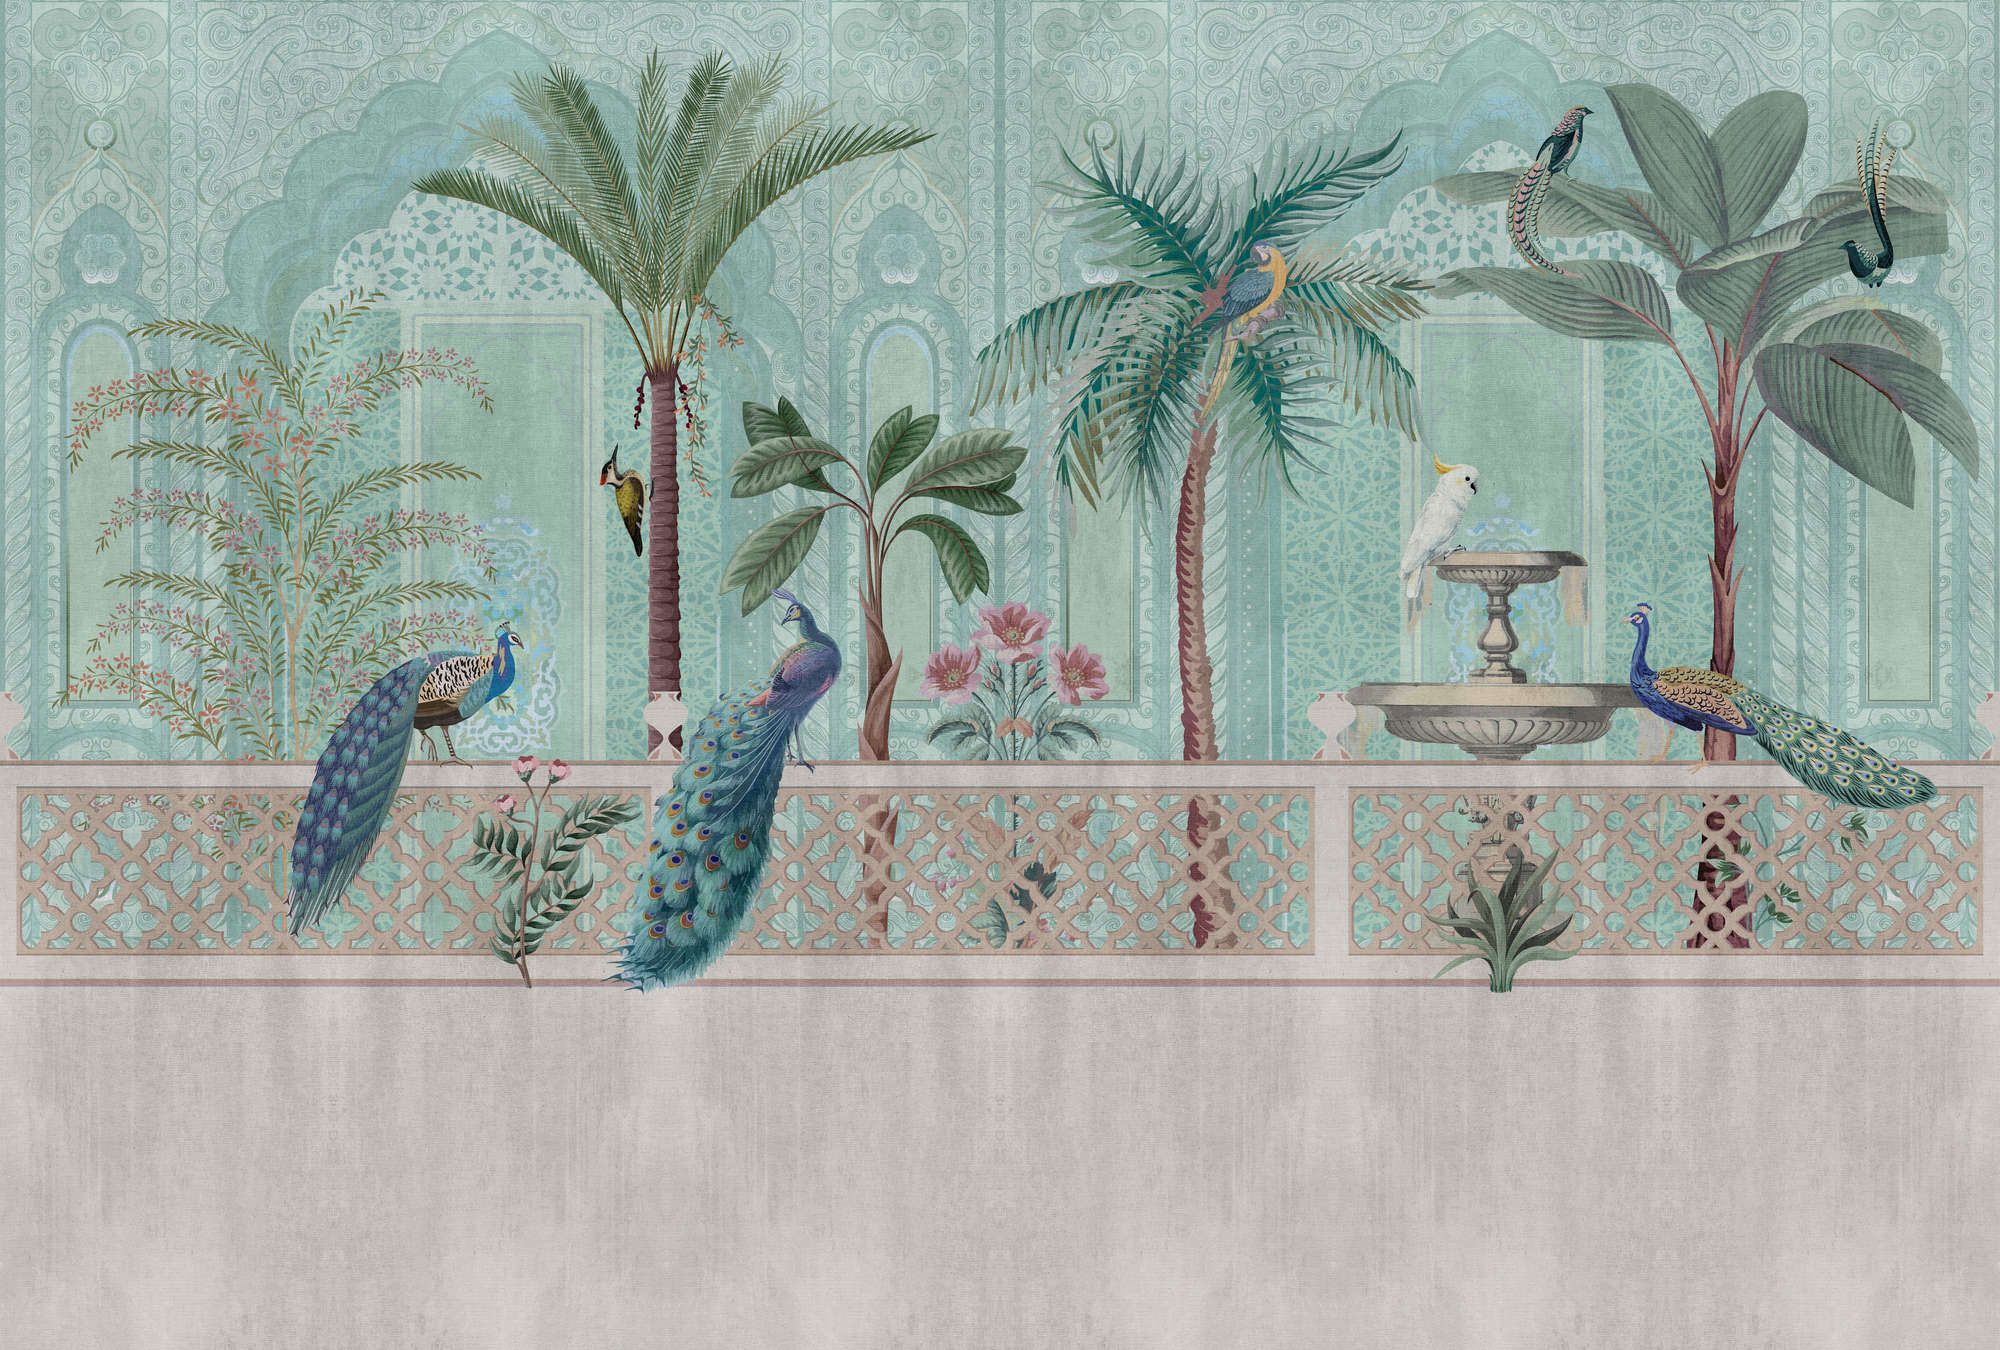             Photo wallpaper »pavo« - Birds, palm trees & fountains - Green, blue with tapestry texture | Smooth, slightly shiny premium non-woven fabric
        